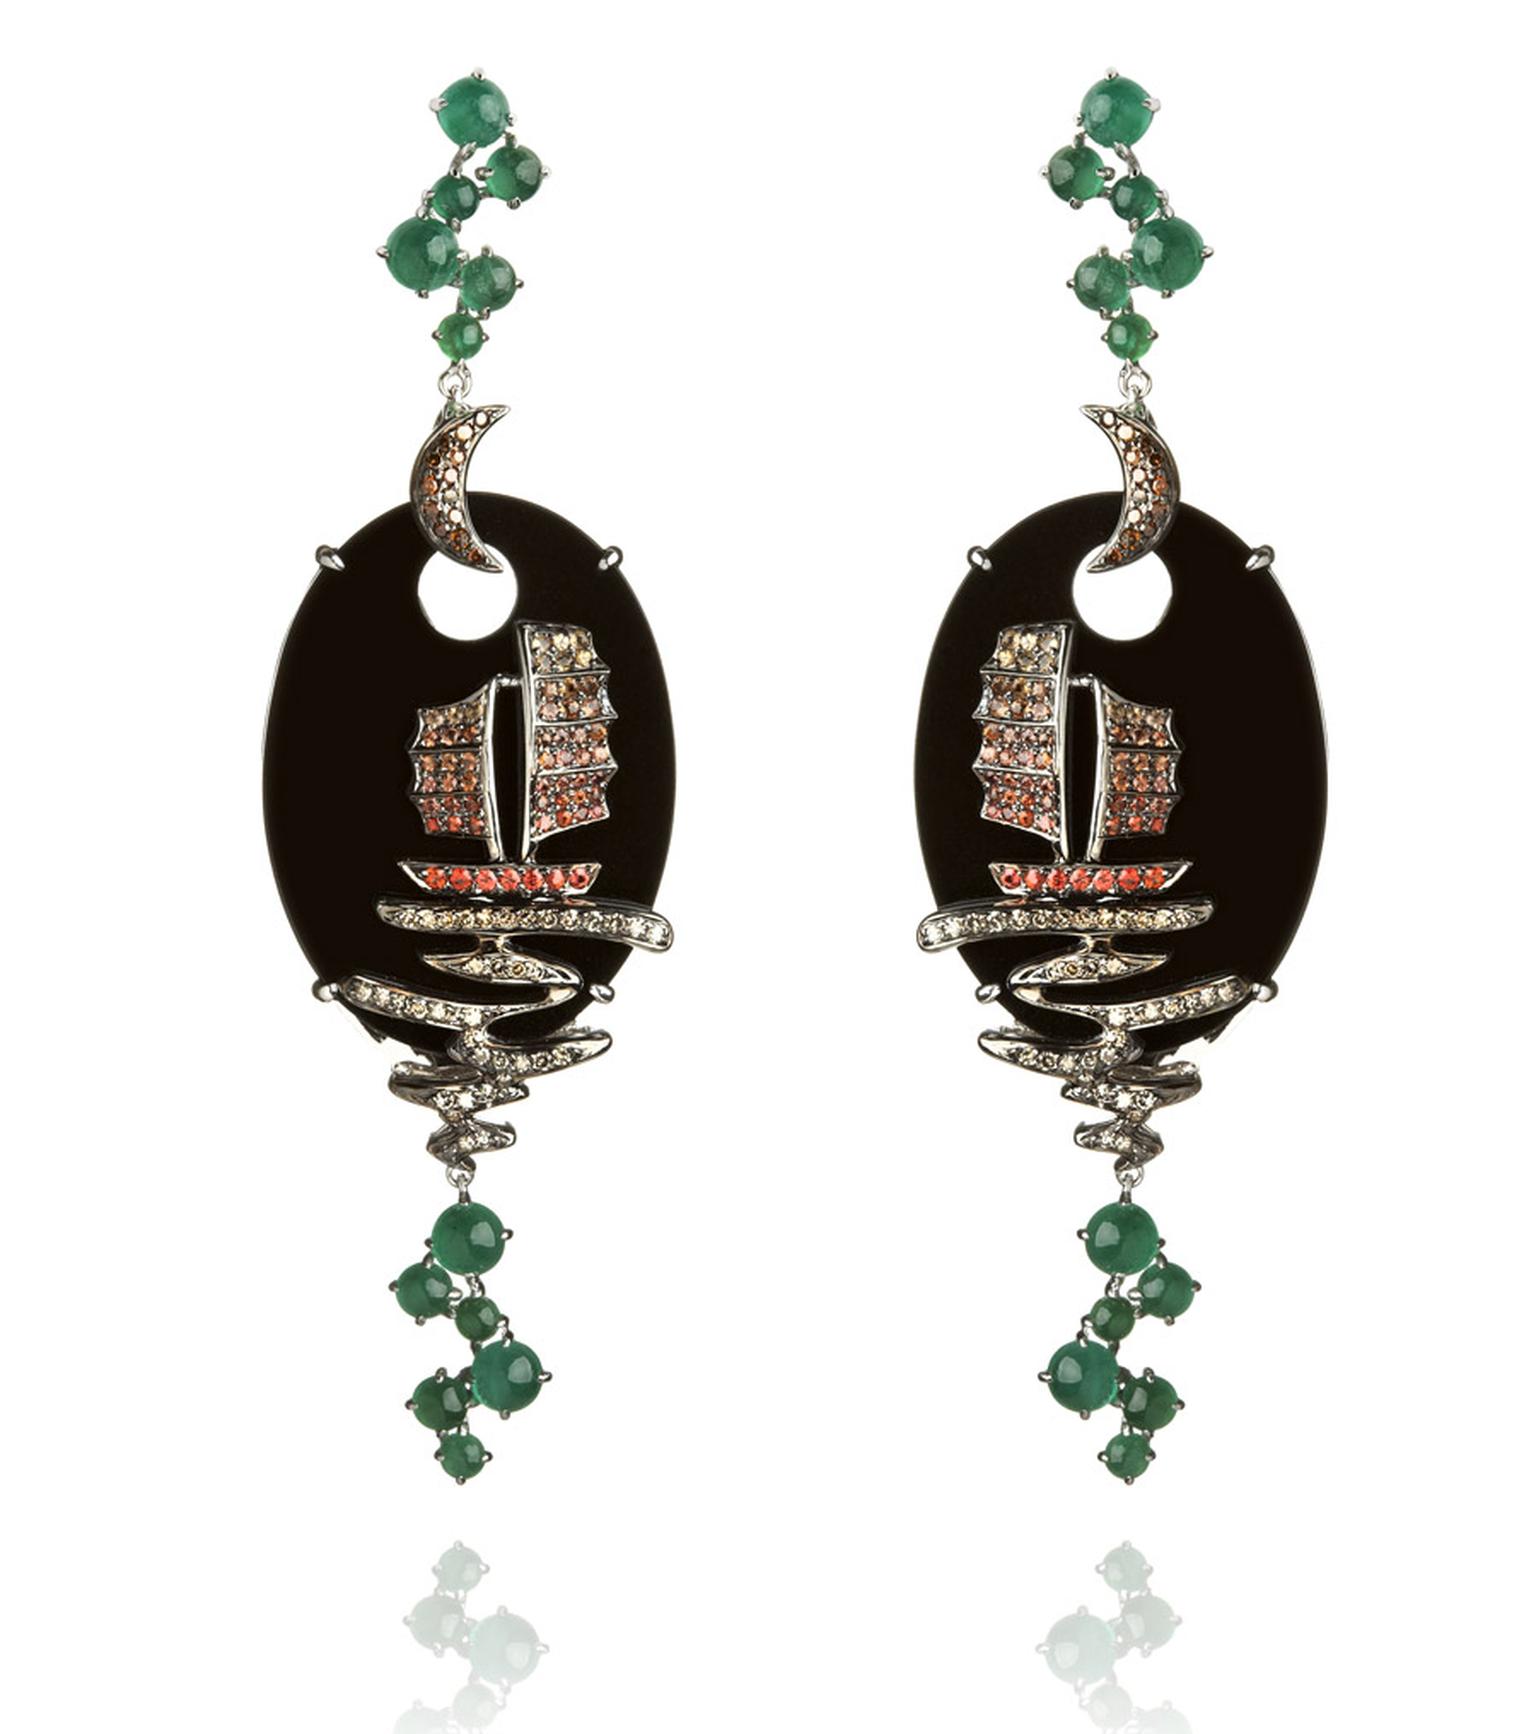 White gold, diamond, sapphire and emerald Fantasie Night Ship earrings by Wendy Yue for Annoushka (£9,200).